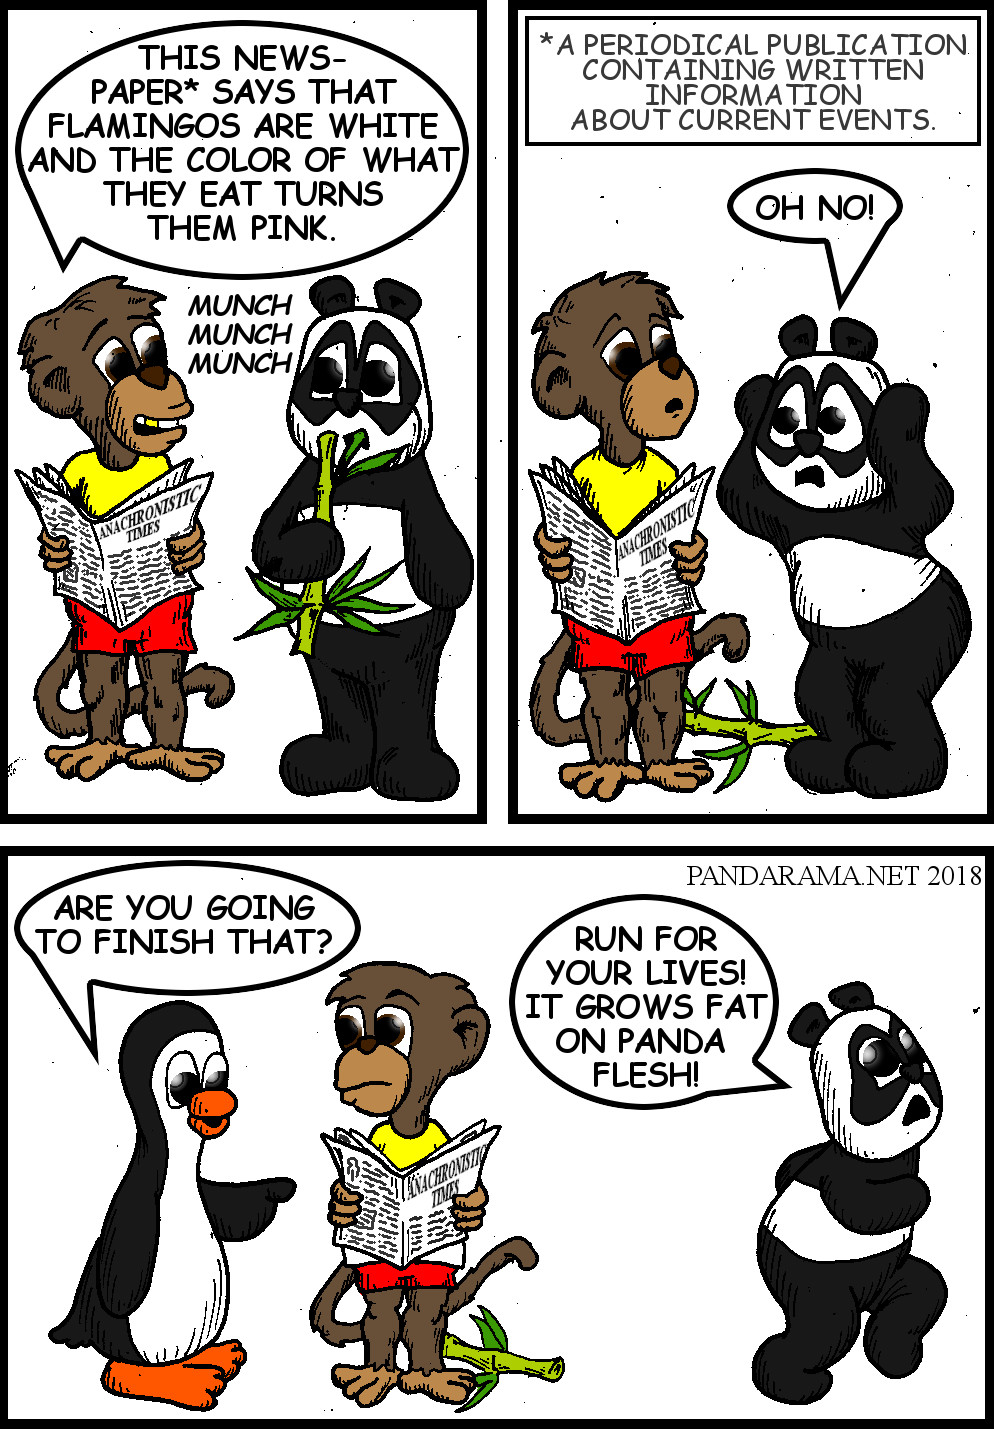 monkey and panda learn from newspaper that flamingos tturn pink from the food they eat, panda then flees from a penguin, but the penguin wants to eat the newspaper.